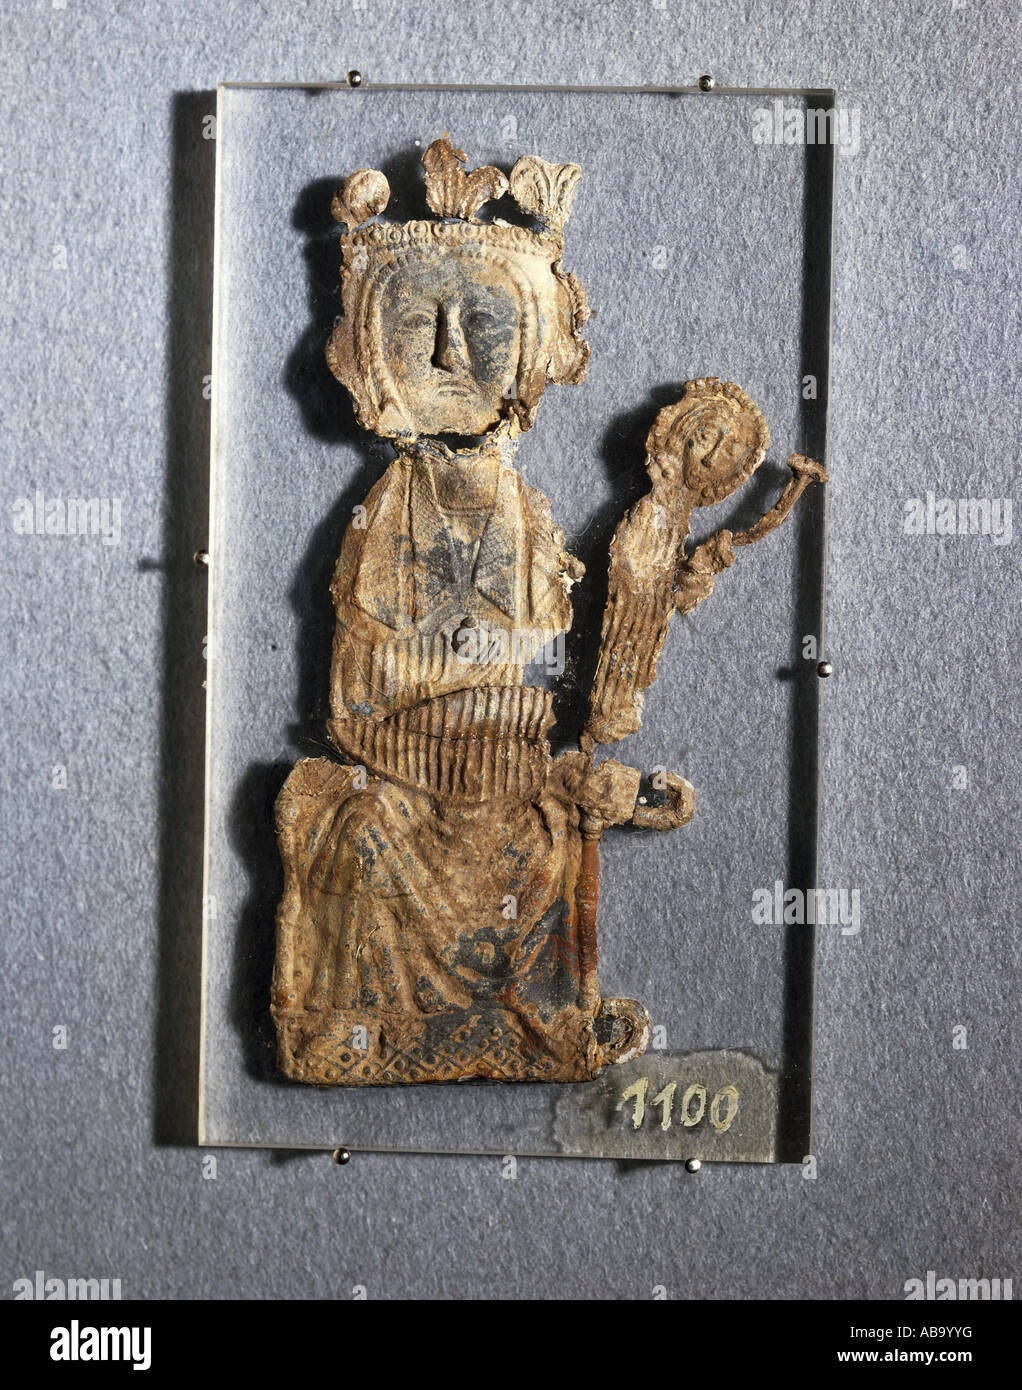 religion, christianity, pilgramage, pilgrimS s badge, Madonna with Child, solder, France, 13th century, private collection, pilgrim, pilgrims, French, Virgin Mary, Jesus Christ, middle ages, gothic, historic, historical, medieval, Stock Photo